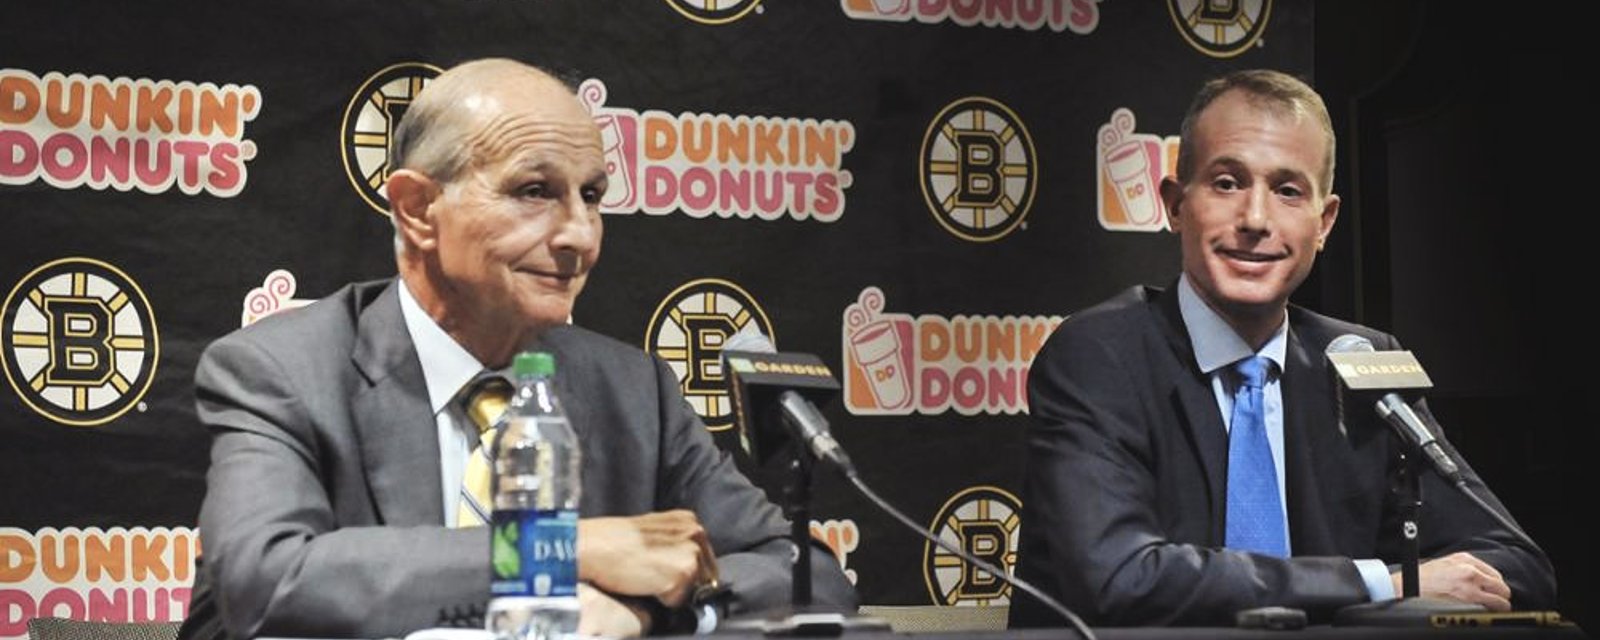 Report: Bruins’ owner Jacobs forced to pay back nearly $14 million to community